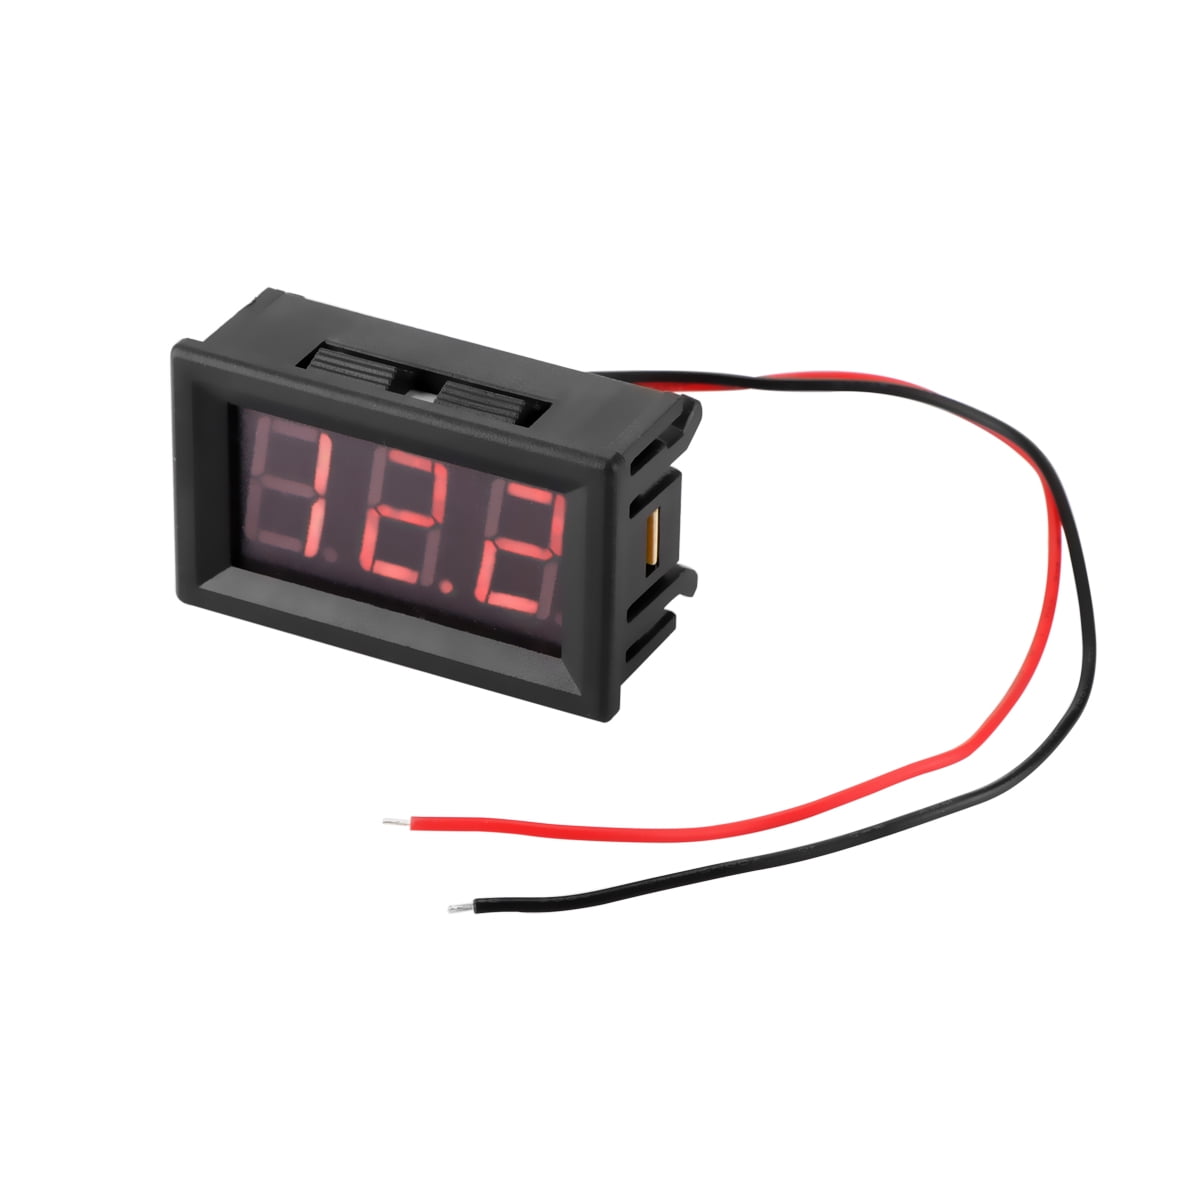 Red 0.56" DC 4.5-30V LED Digital Voltmeter Panel Accurate Meter 3 Wire 